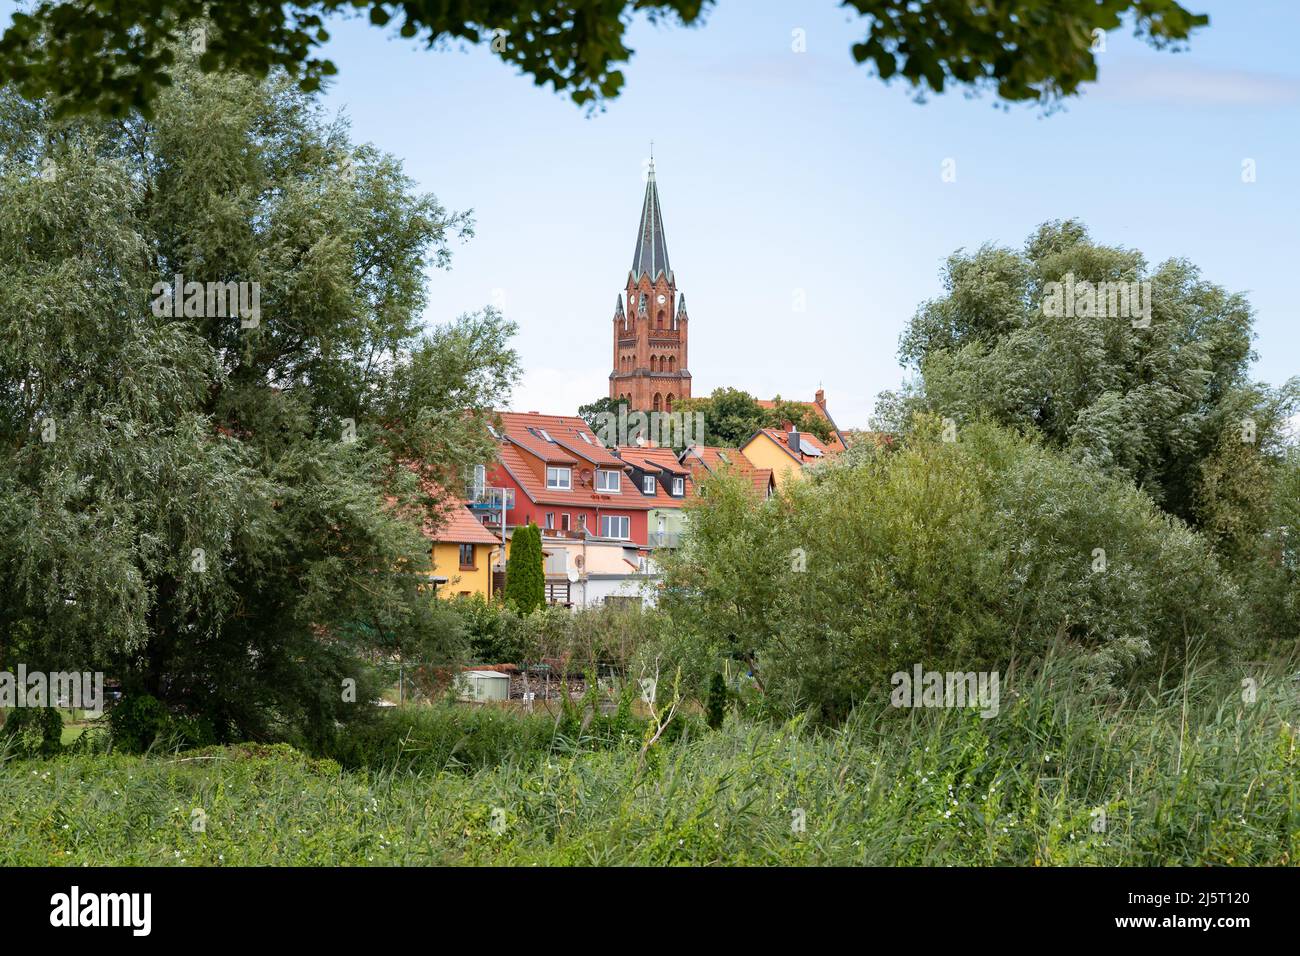 Landscape of Röbel Müritz when looking at the city center. The tower of the church is visible at the horizon. A skyline of a small town in Germany. Stock Photo